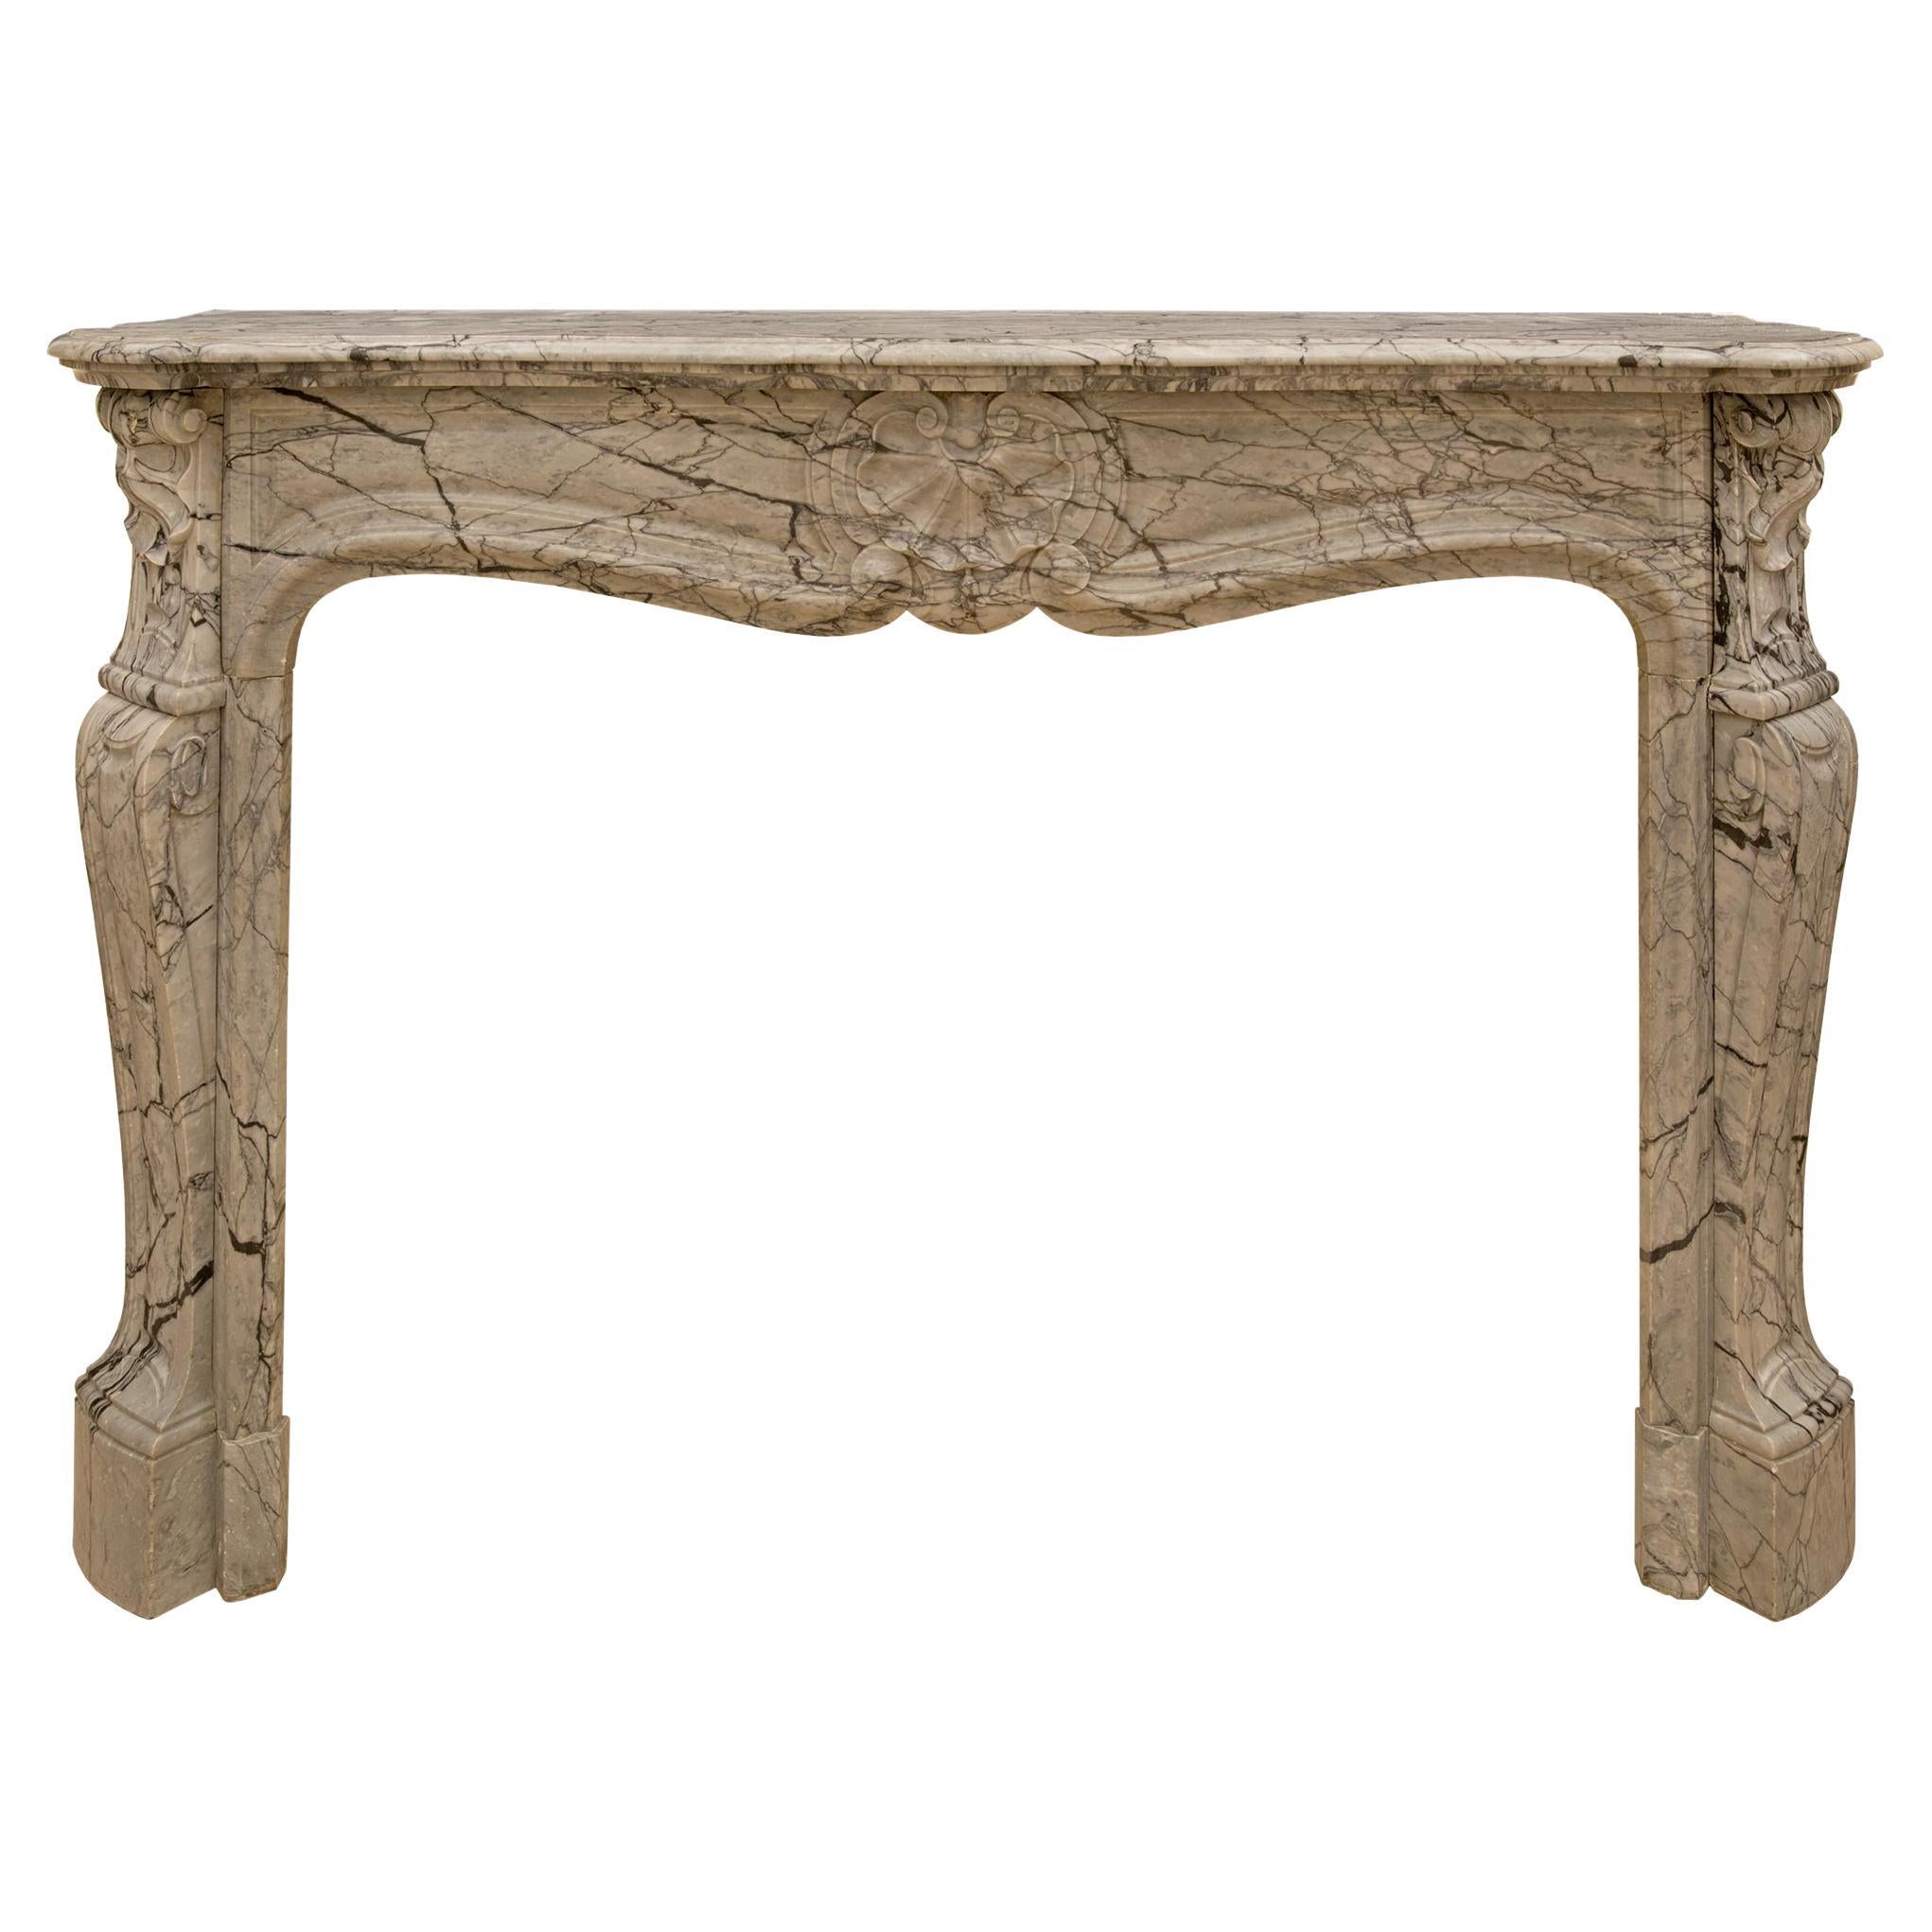 French Mid 19th Century Louis XV St. Sarrancolin Marble Fireplace Mantle